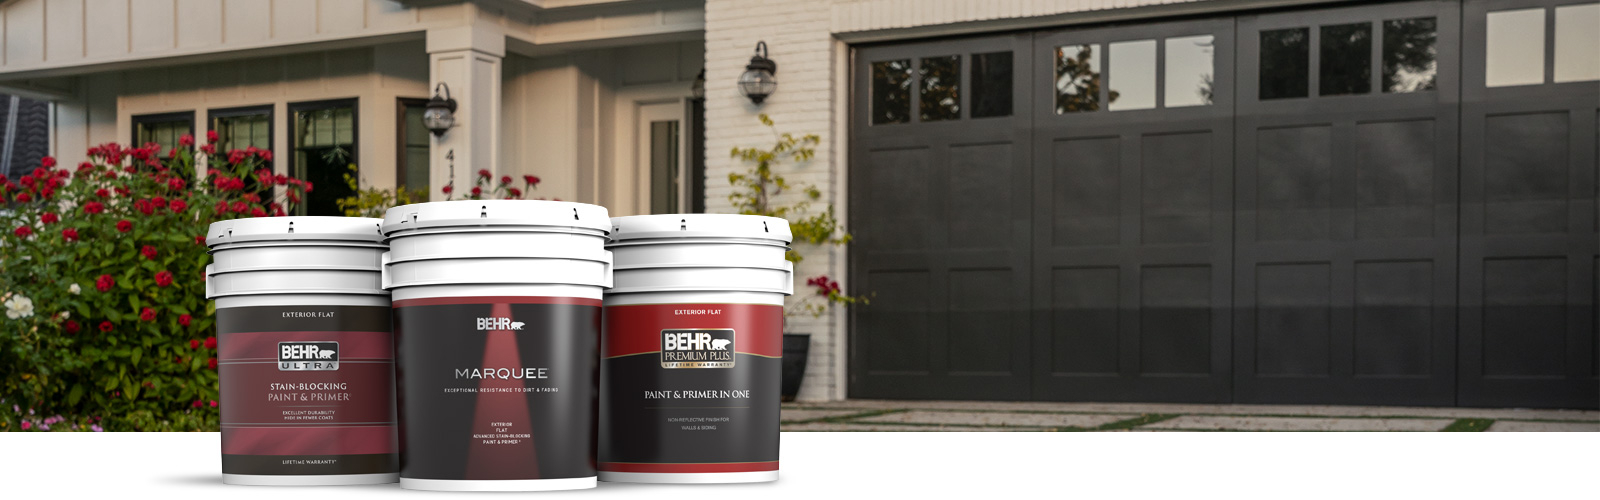 Behr Pro exterior products landing page desktop image featuring 5 gallon cans.